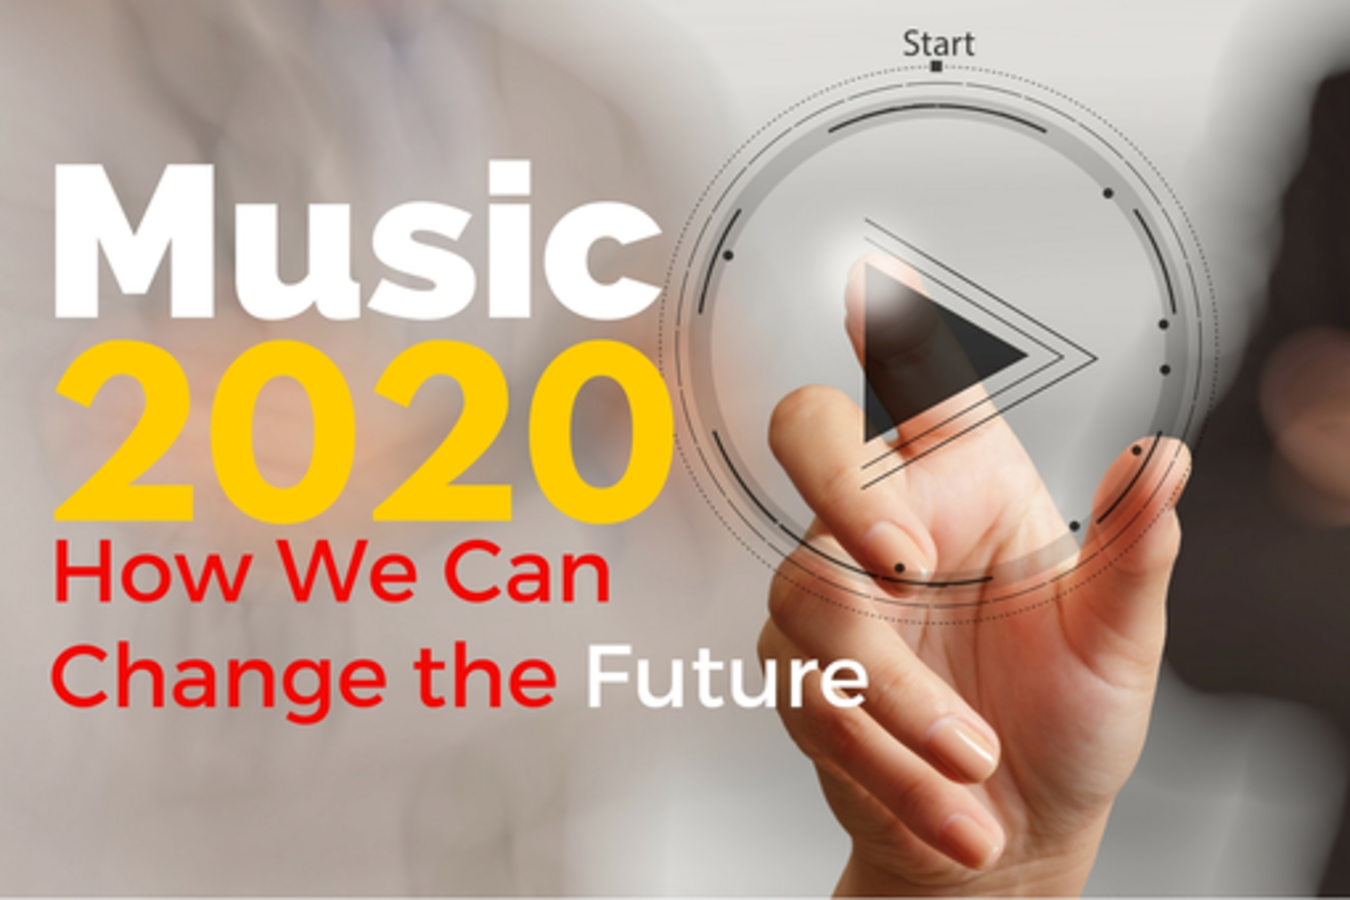 Music 2020: How We Can Change the Future | SXSW 2016 Event ...